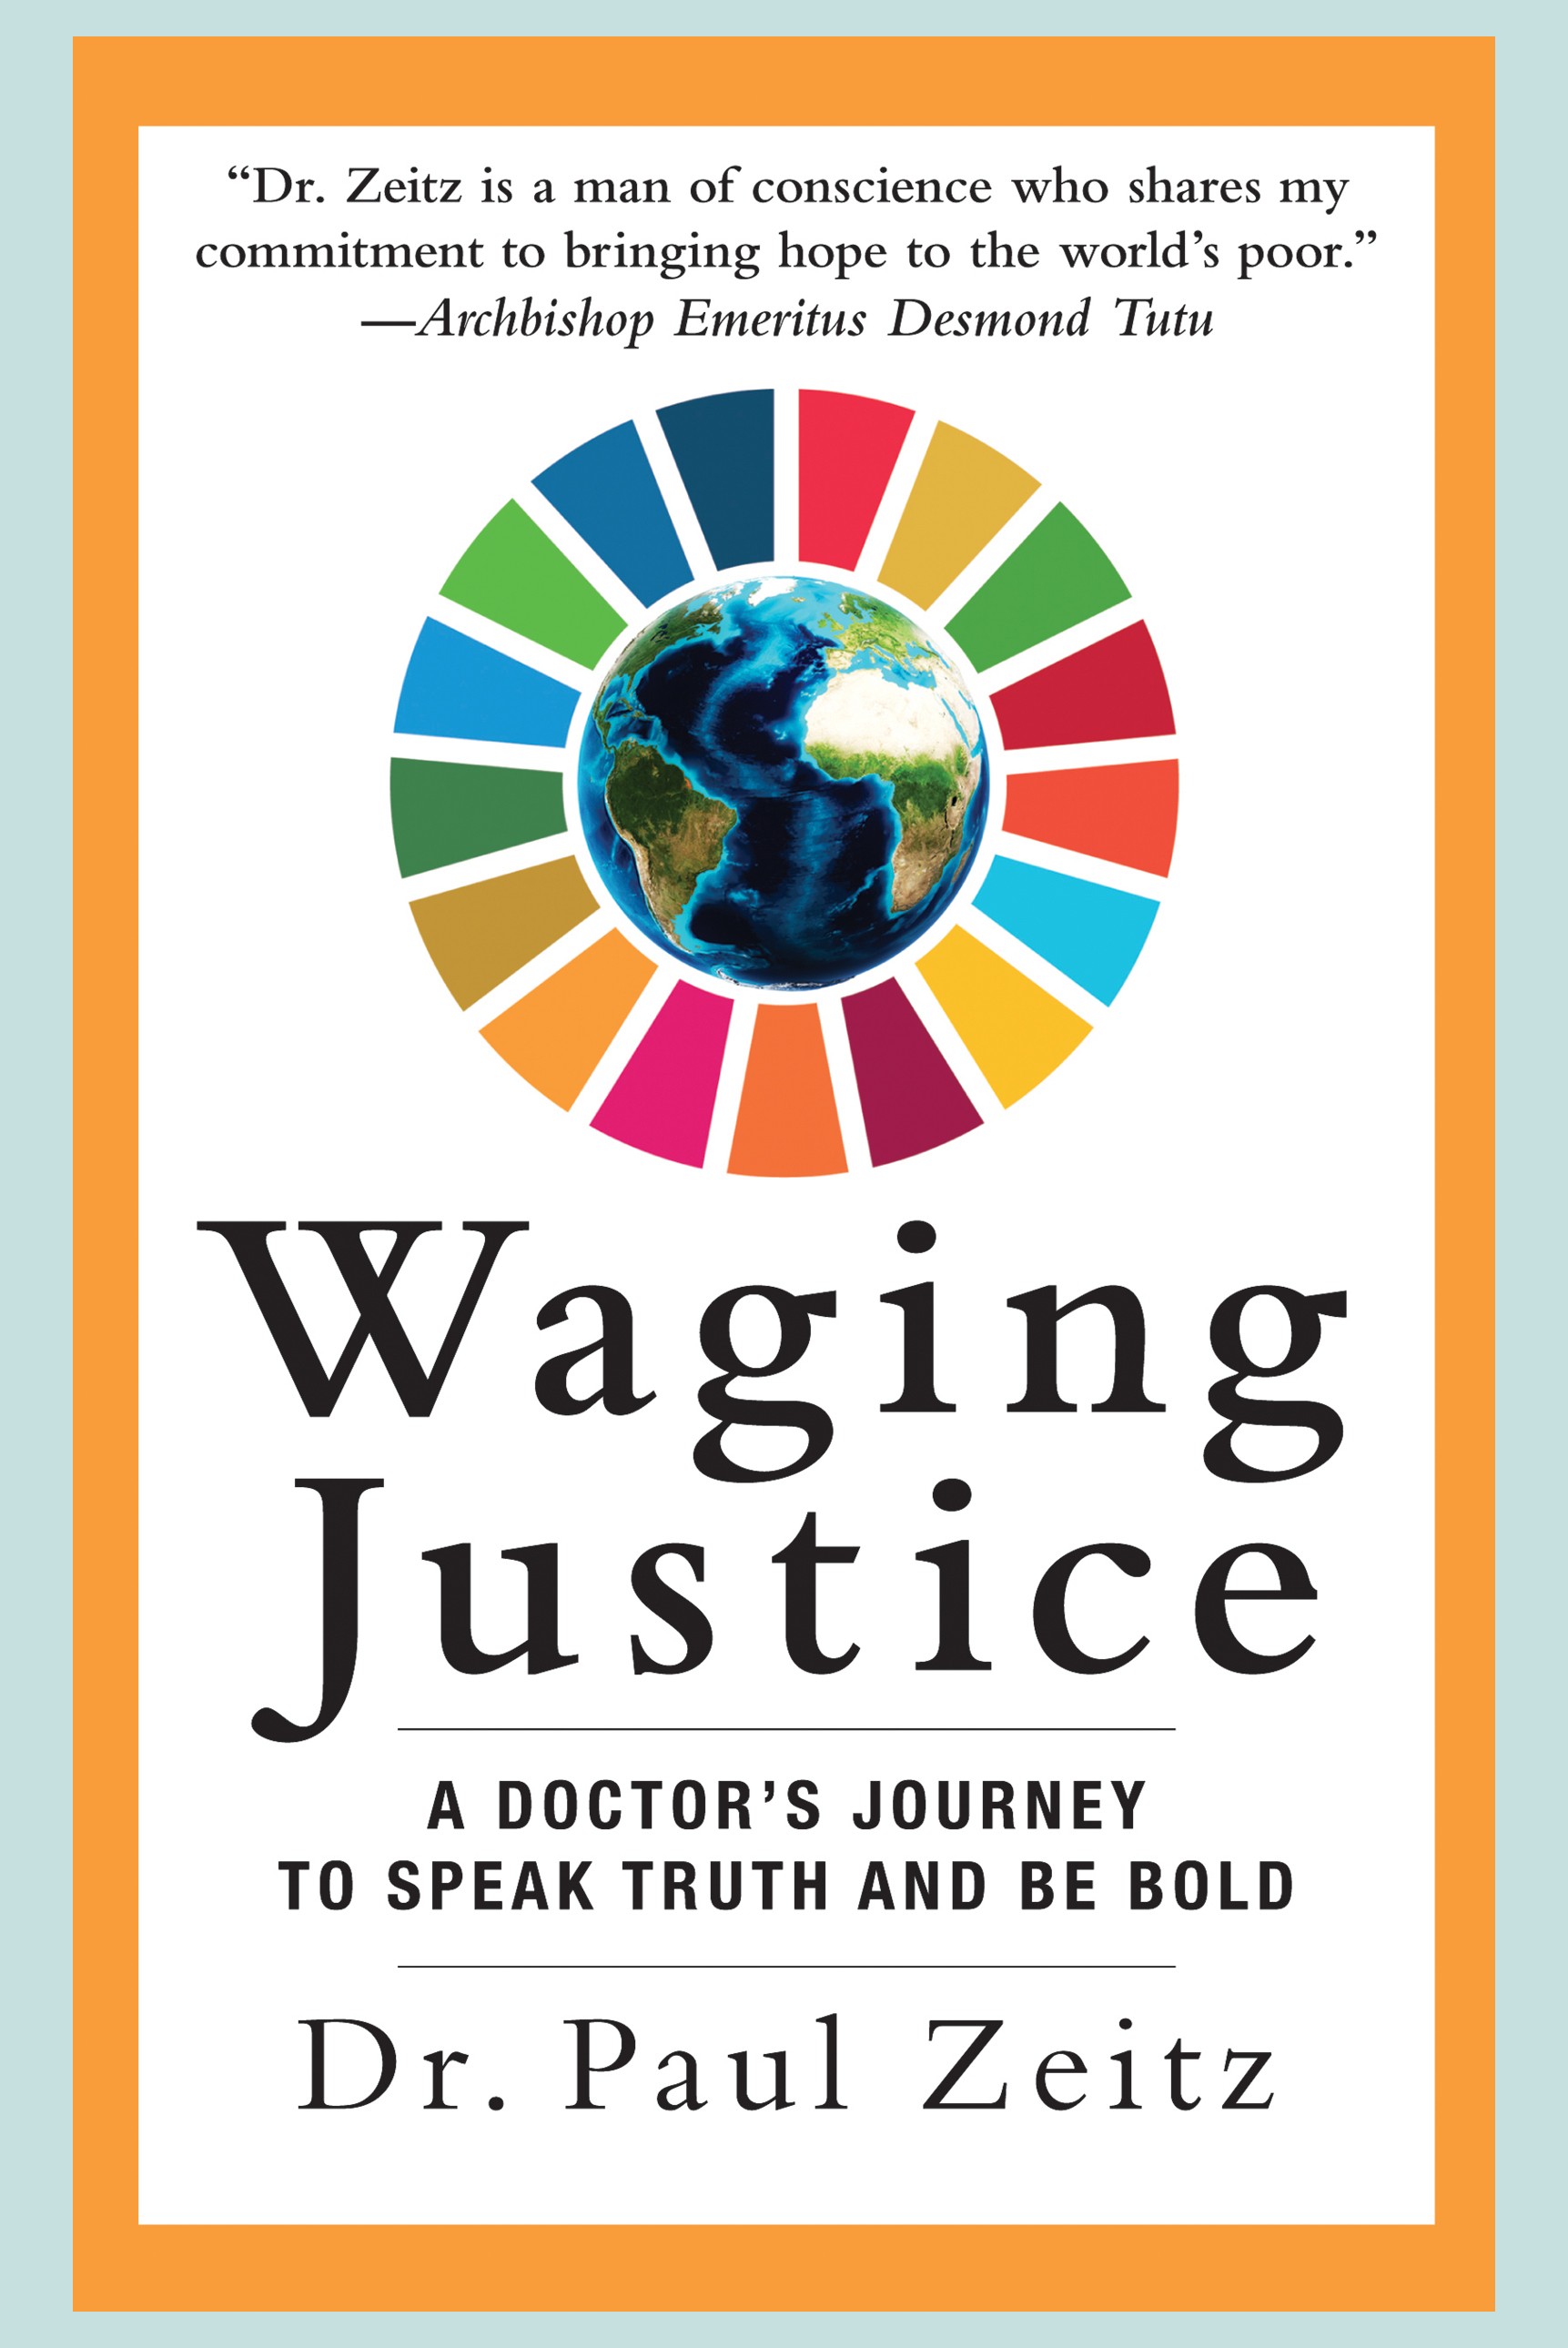 Waging Justice: A Doctor's Journey to Speak Truth and Be Bold